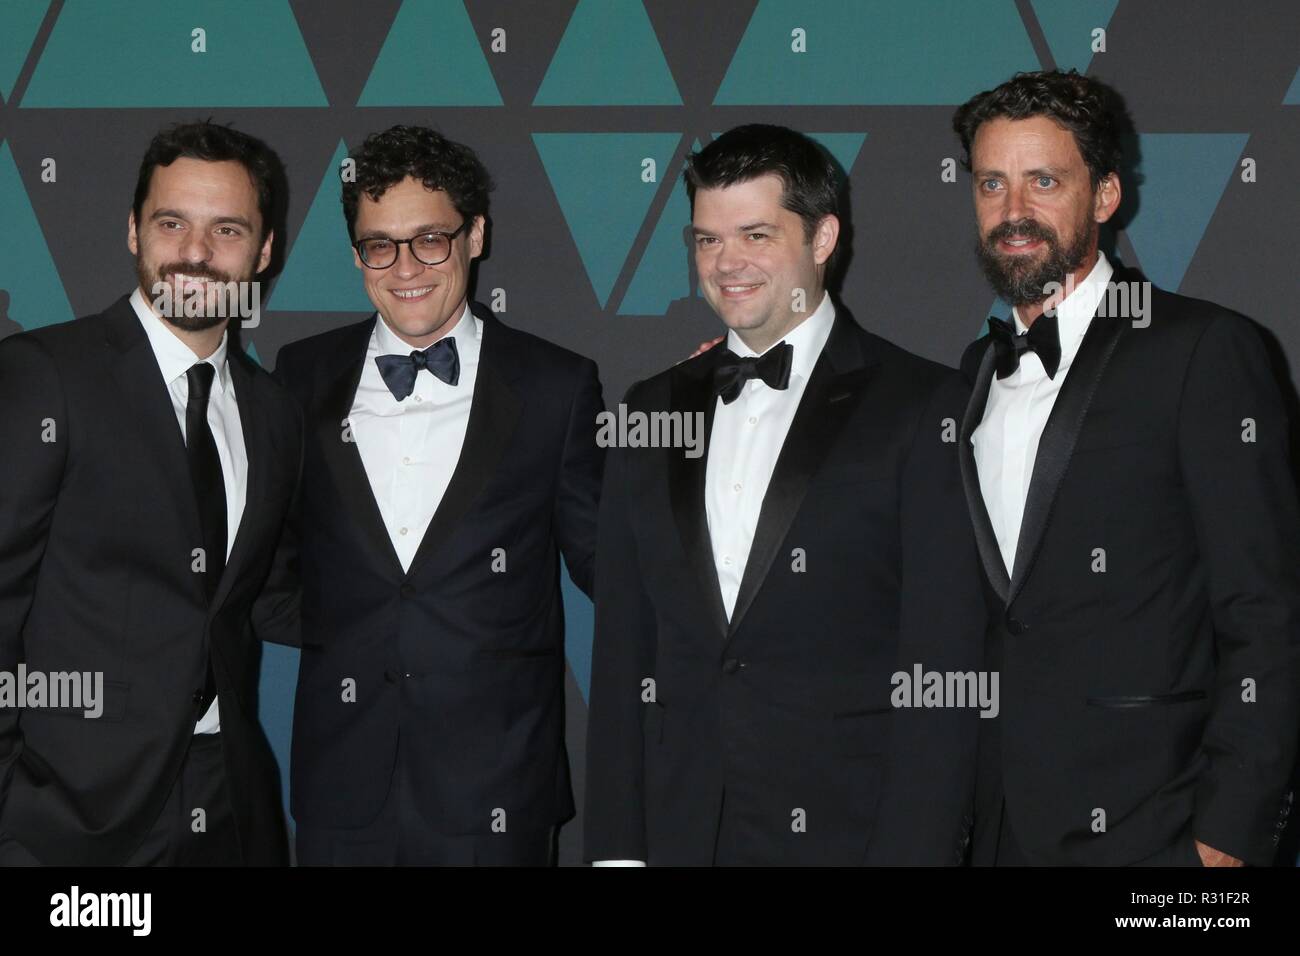 Los Angeles, CA, USA. 18th Nov, 2018. Jake Johnson, Phil Lord, Chris Miller, Bob Persichetti at arrivals for 10th Annual Governors Awards - Part 3, Dolby Theatre, Los Angeles, CA November 18, 2018. Credit: Priscilla Grant/Everett Collection/Alamy Live News Stock Photo